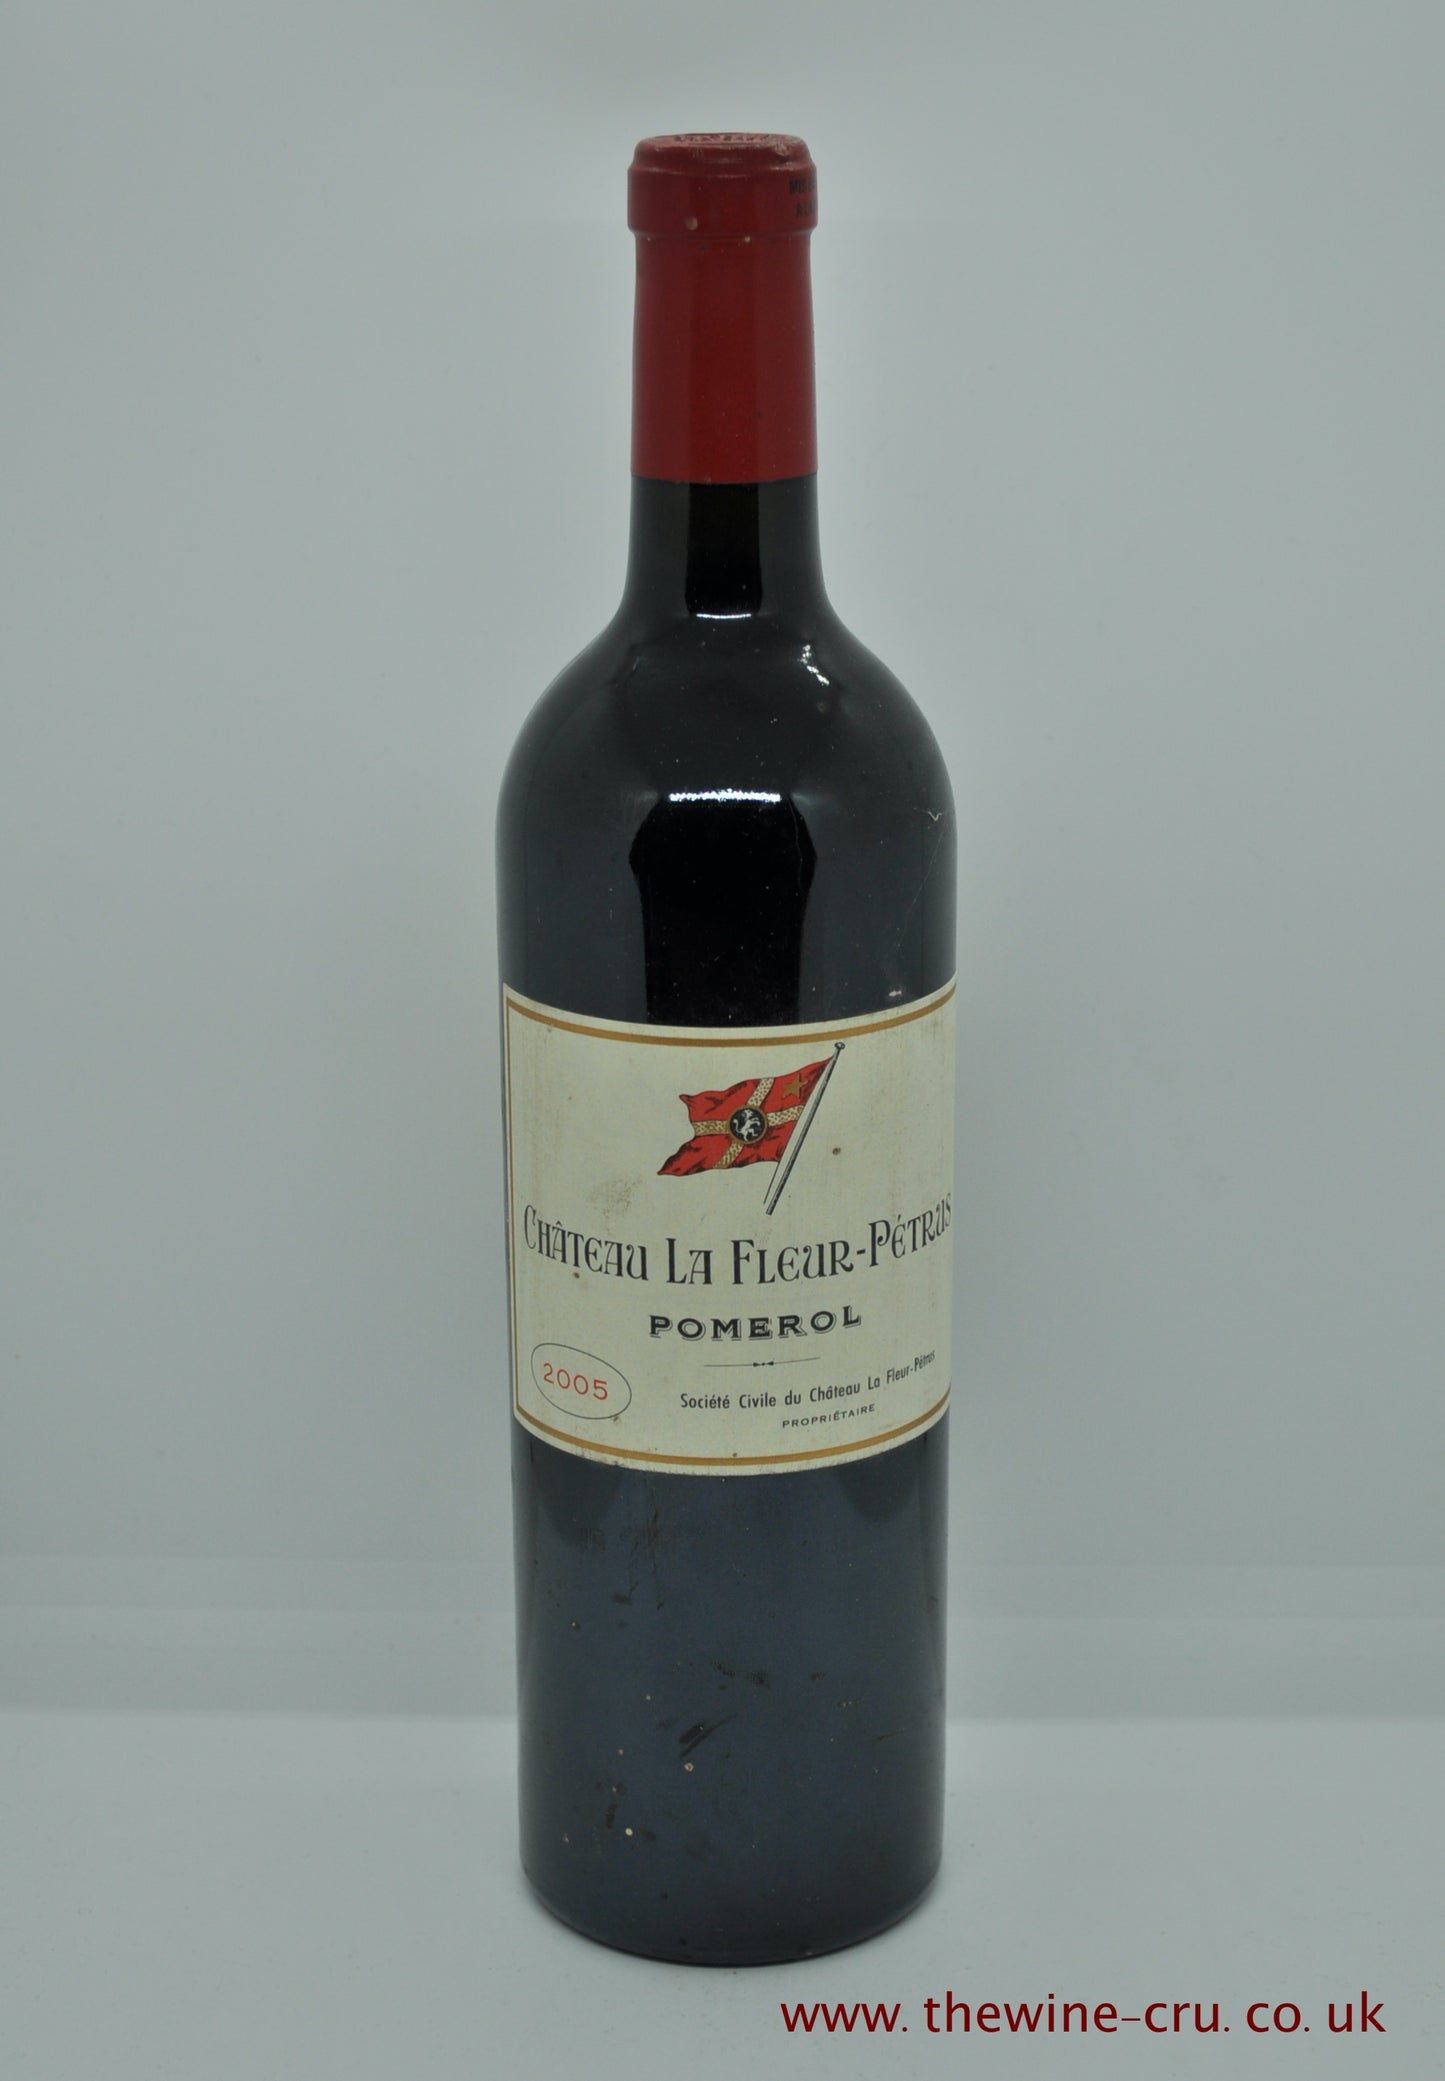 A bottle of 2005 vintage red wine. Chateau La Fleur Petrus. France, Bordeaux, Pomerol. The bottle is in very good condition. Immediate delivery. Free local delivery. Gift wrapping available.